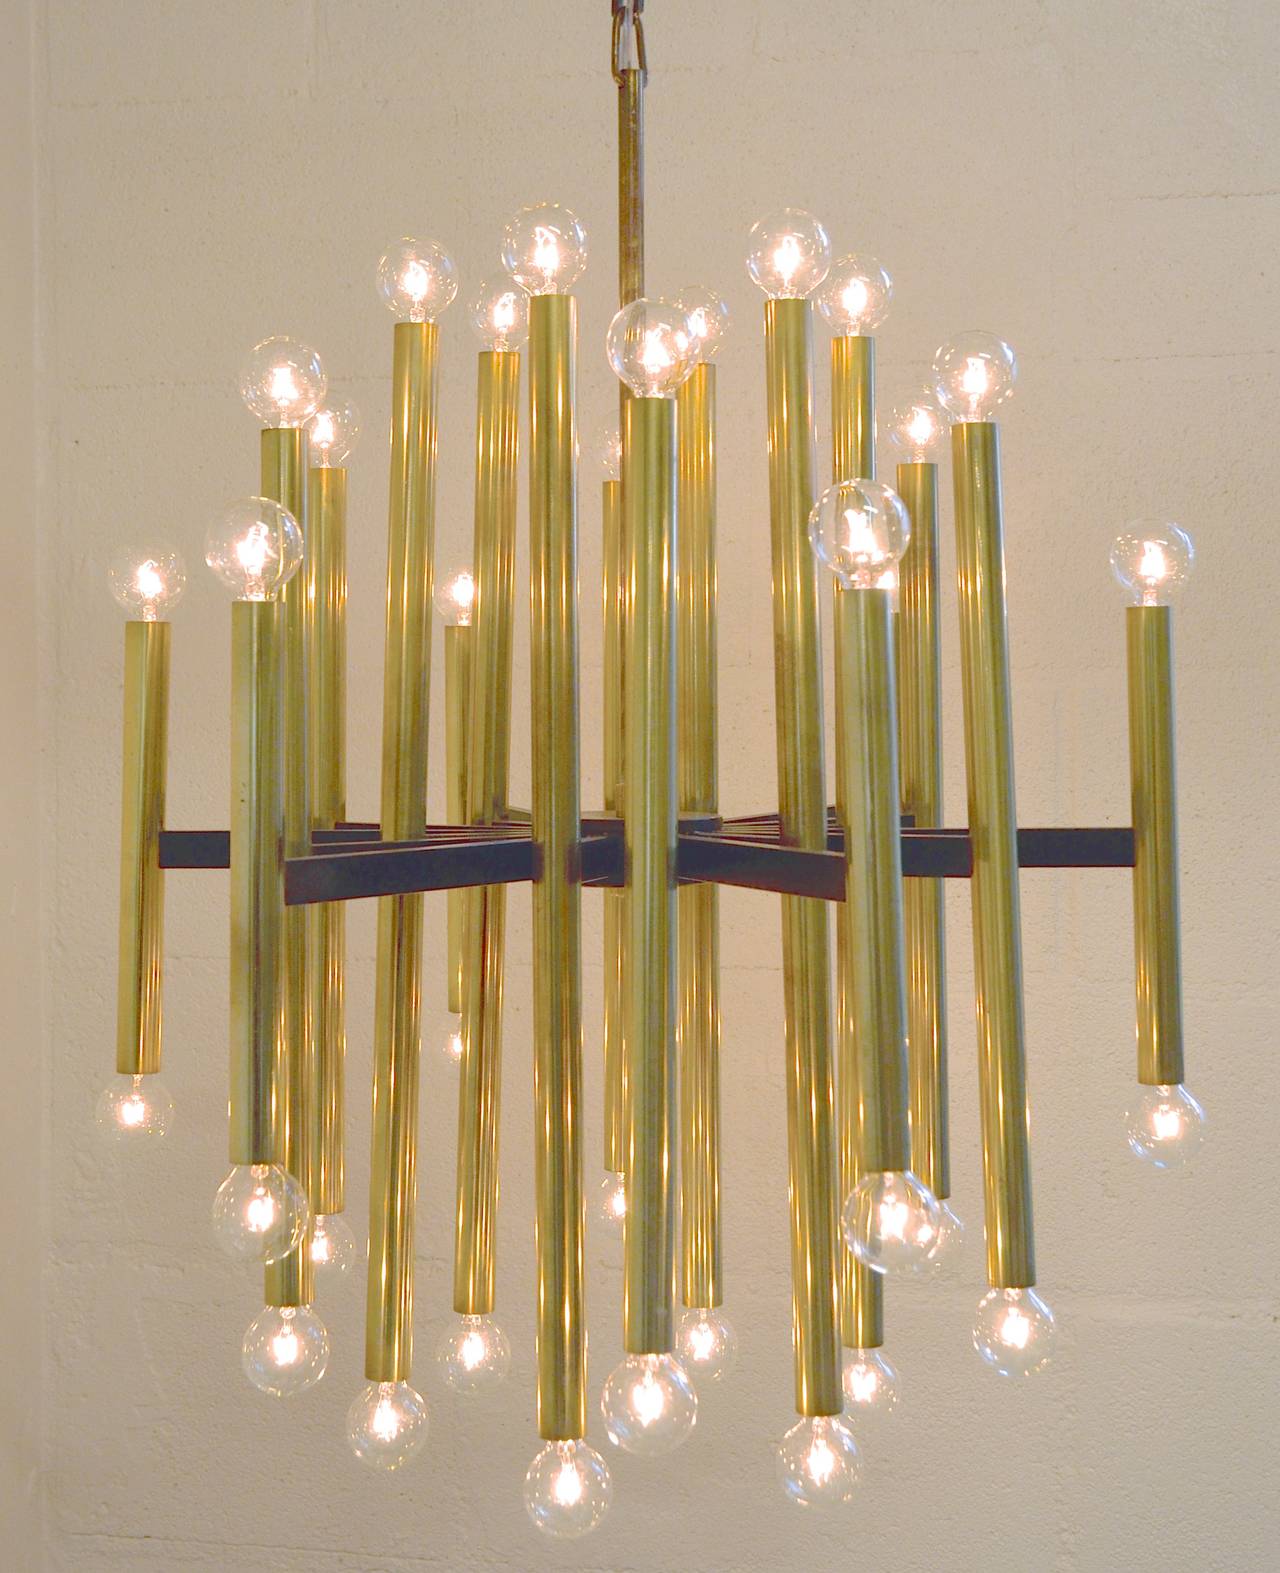 Thirty-six-light chandelier by Gaetano Sciolari for Lightolier, Italian, circa 1960. Black spokes radiating from the center support with 18 brass cylinders with sockets at both ends. Includes original hanging rod and canopy. Newly rewired with